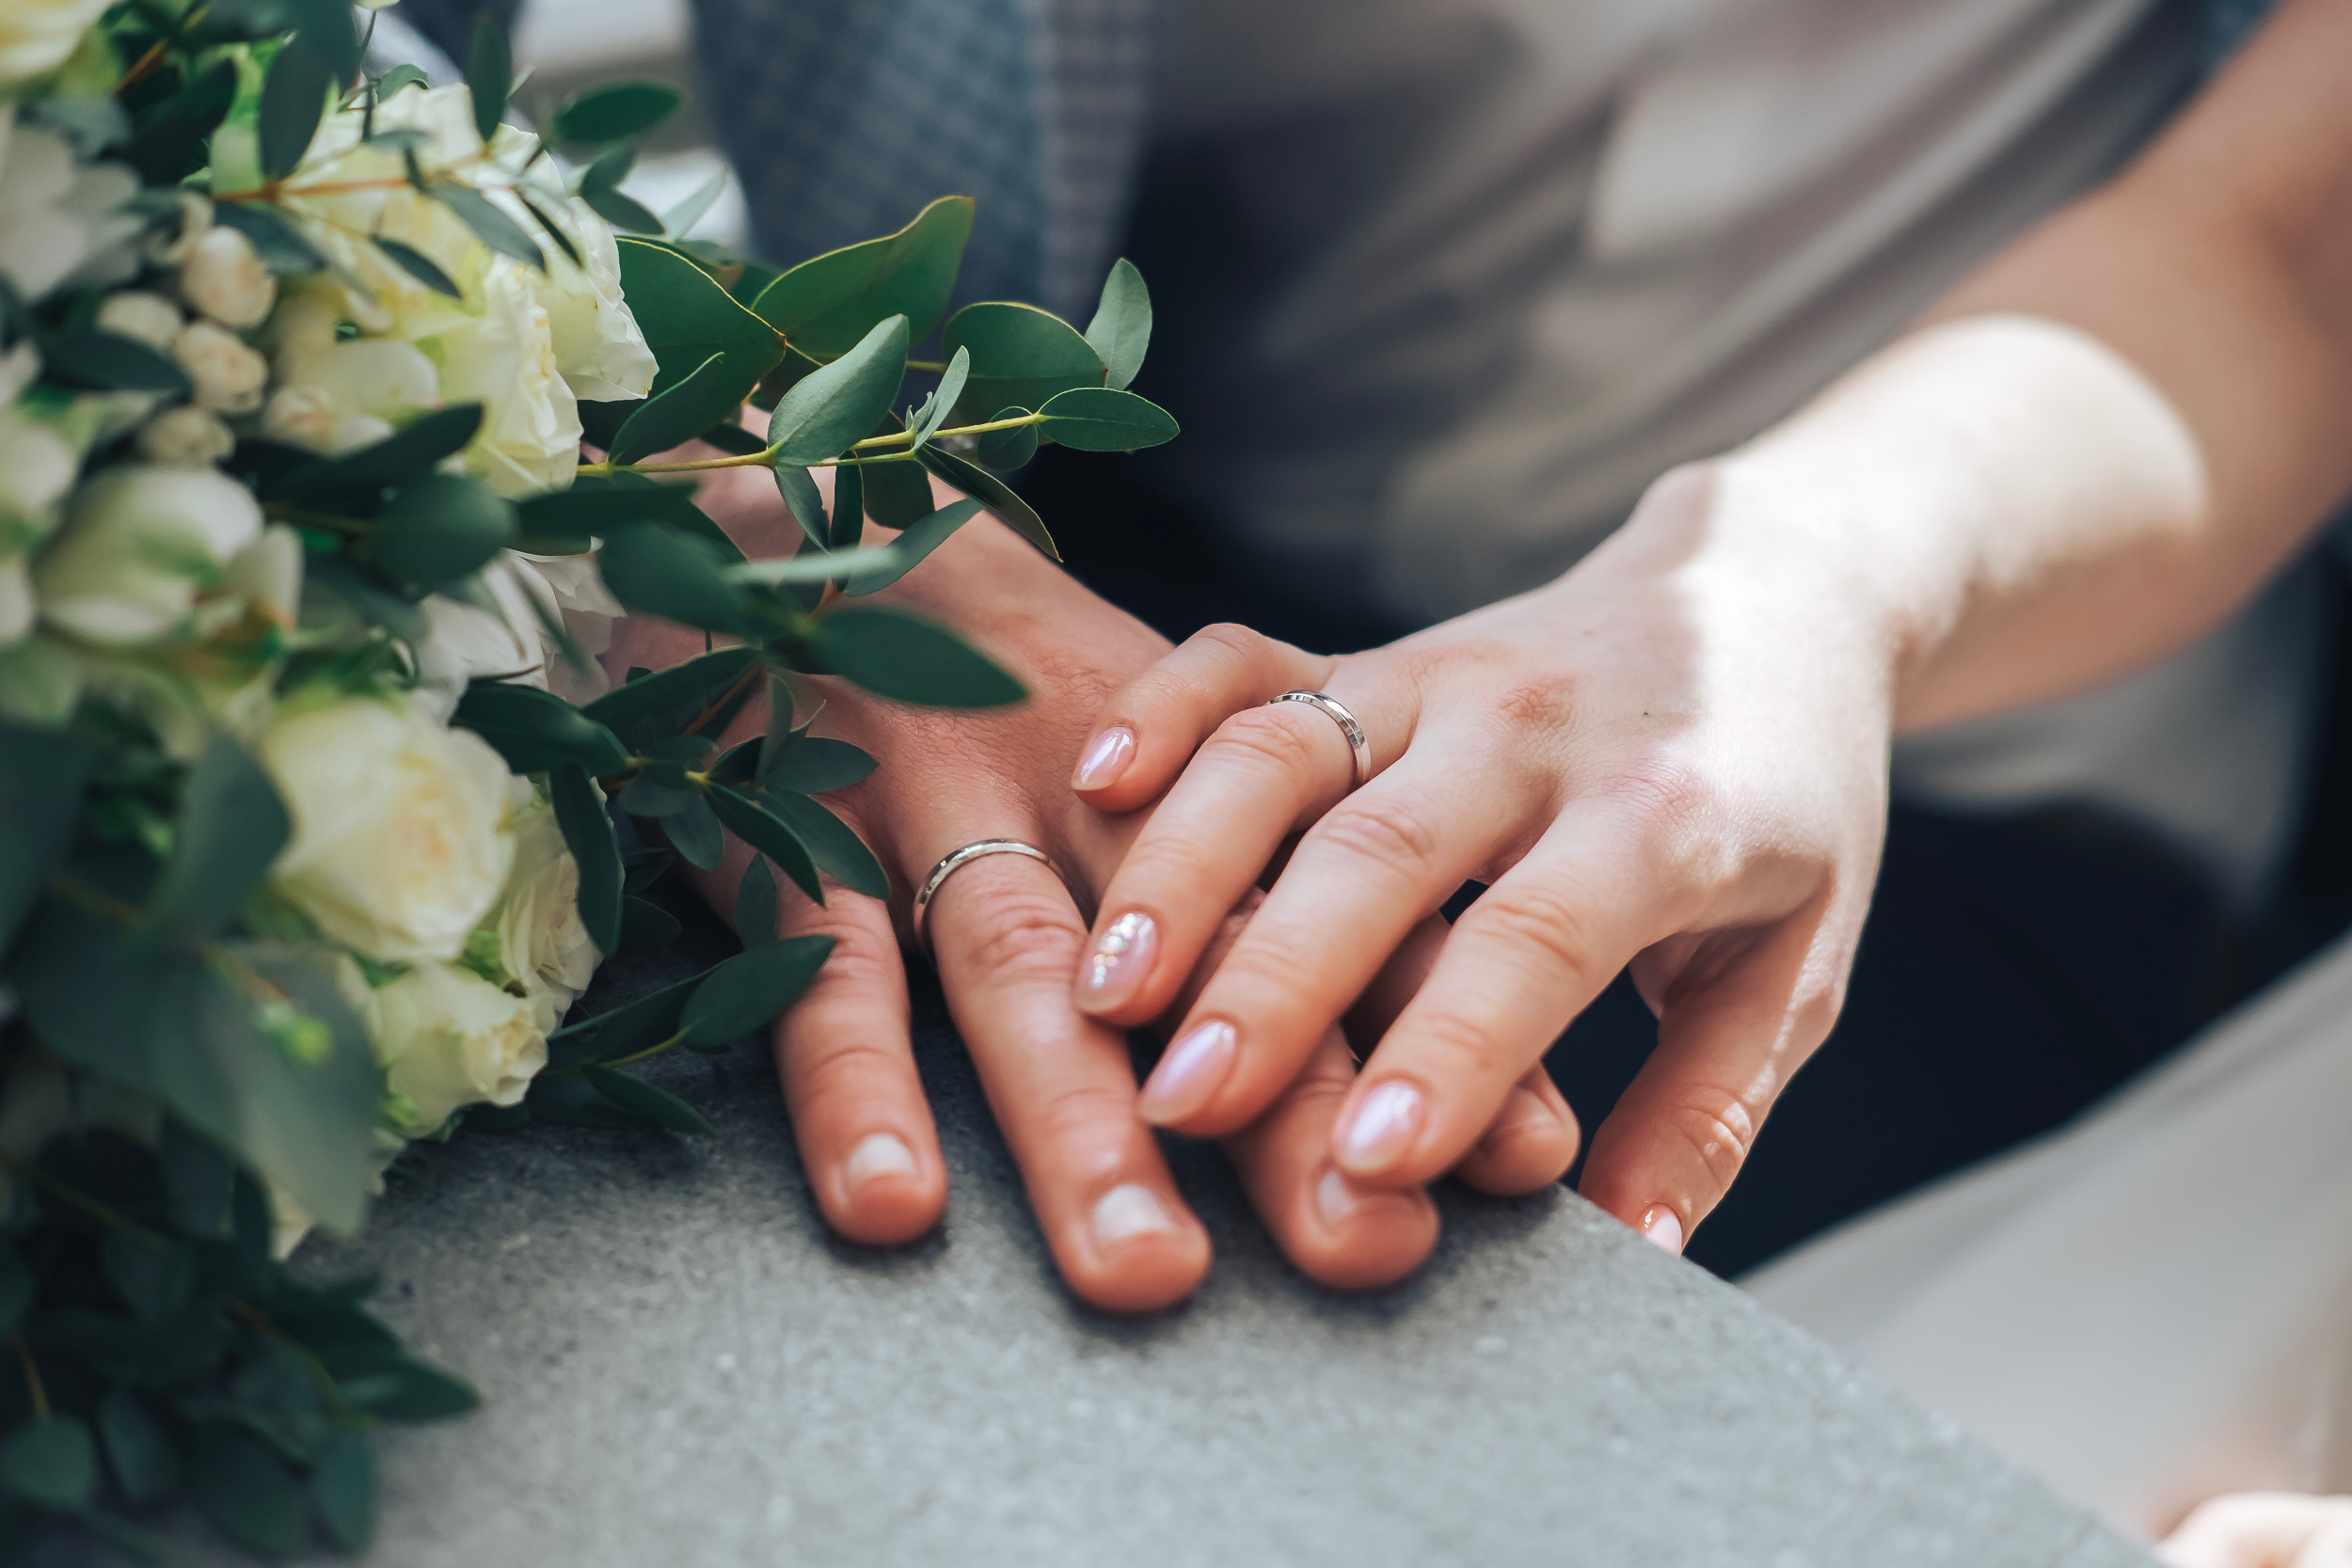 Man and woman folded their hands | Shutterstock